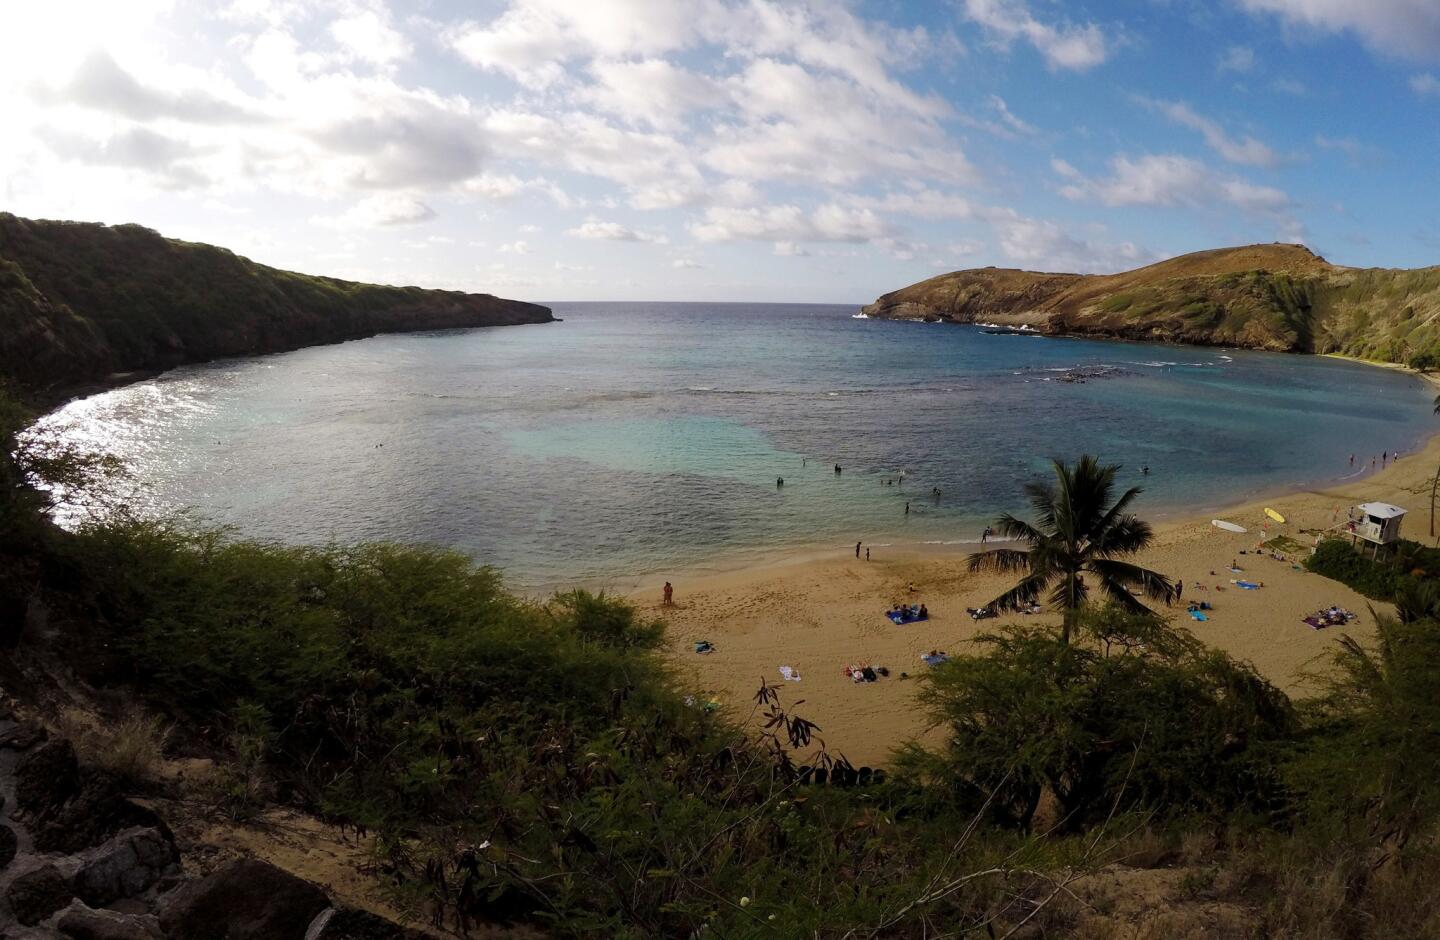 In this May 11, 2016 photo, people swim in Oahu's Hanauma Bay near Honolulu. Hanauma Bay is No. 1 on the list of best beaches for the summer of 2016 compiled by Stephen Leatherman, also known as Dr. Beach, a professor at Florida International University.